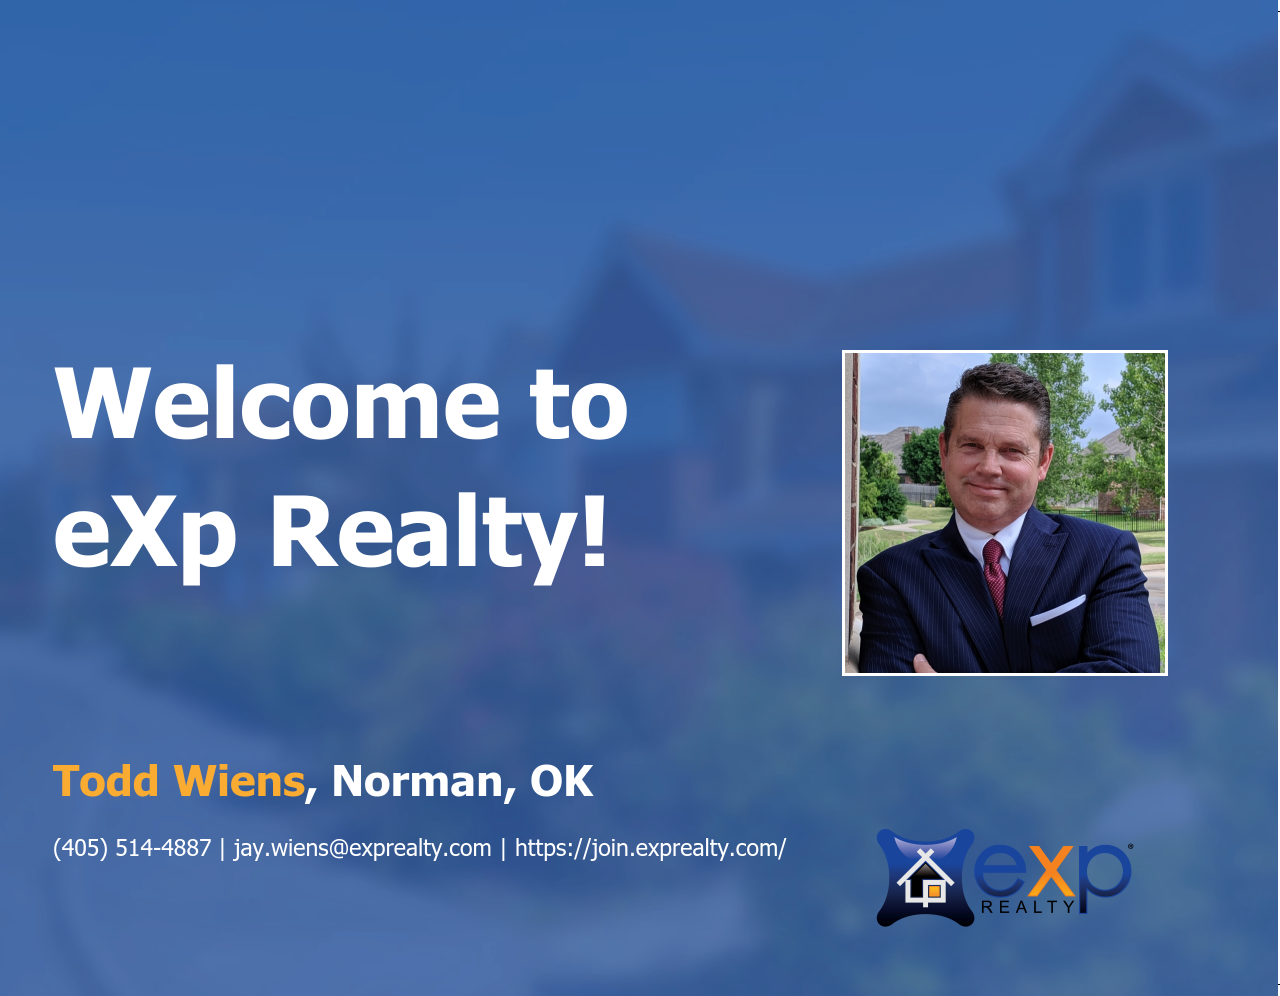 Welcome to eXp Realty Todd Wiens!